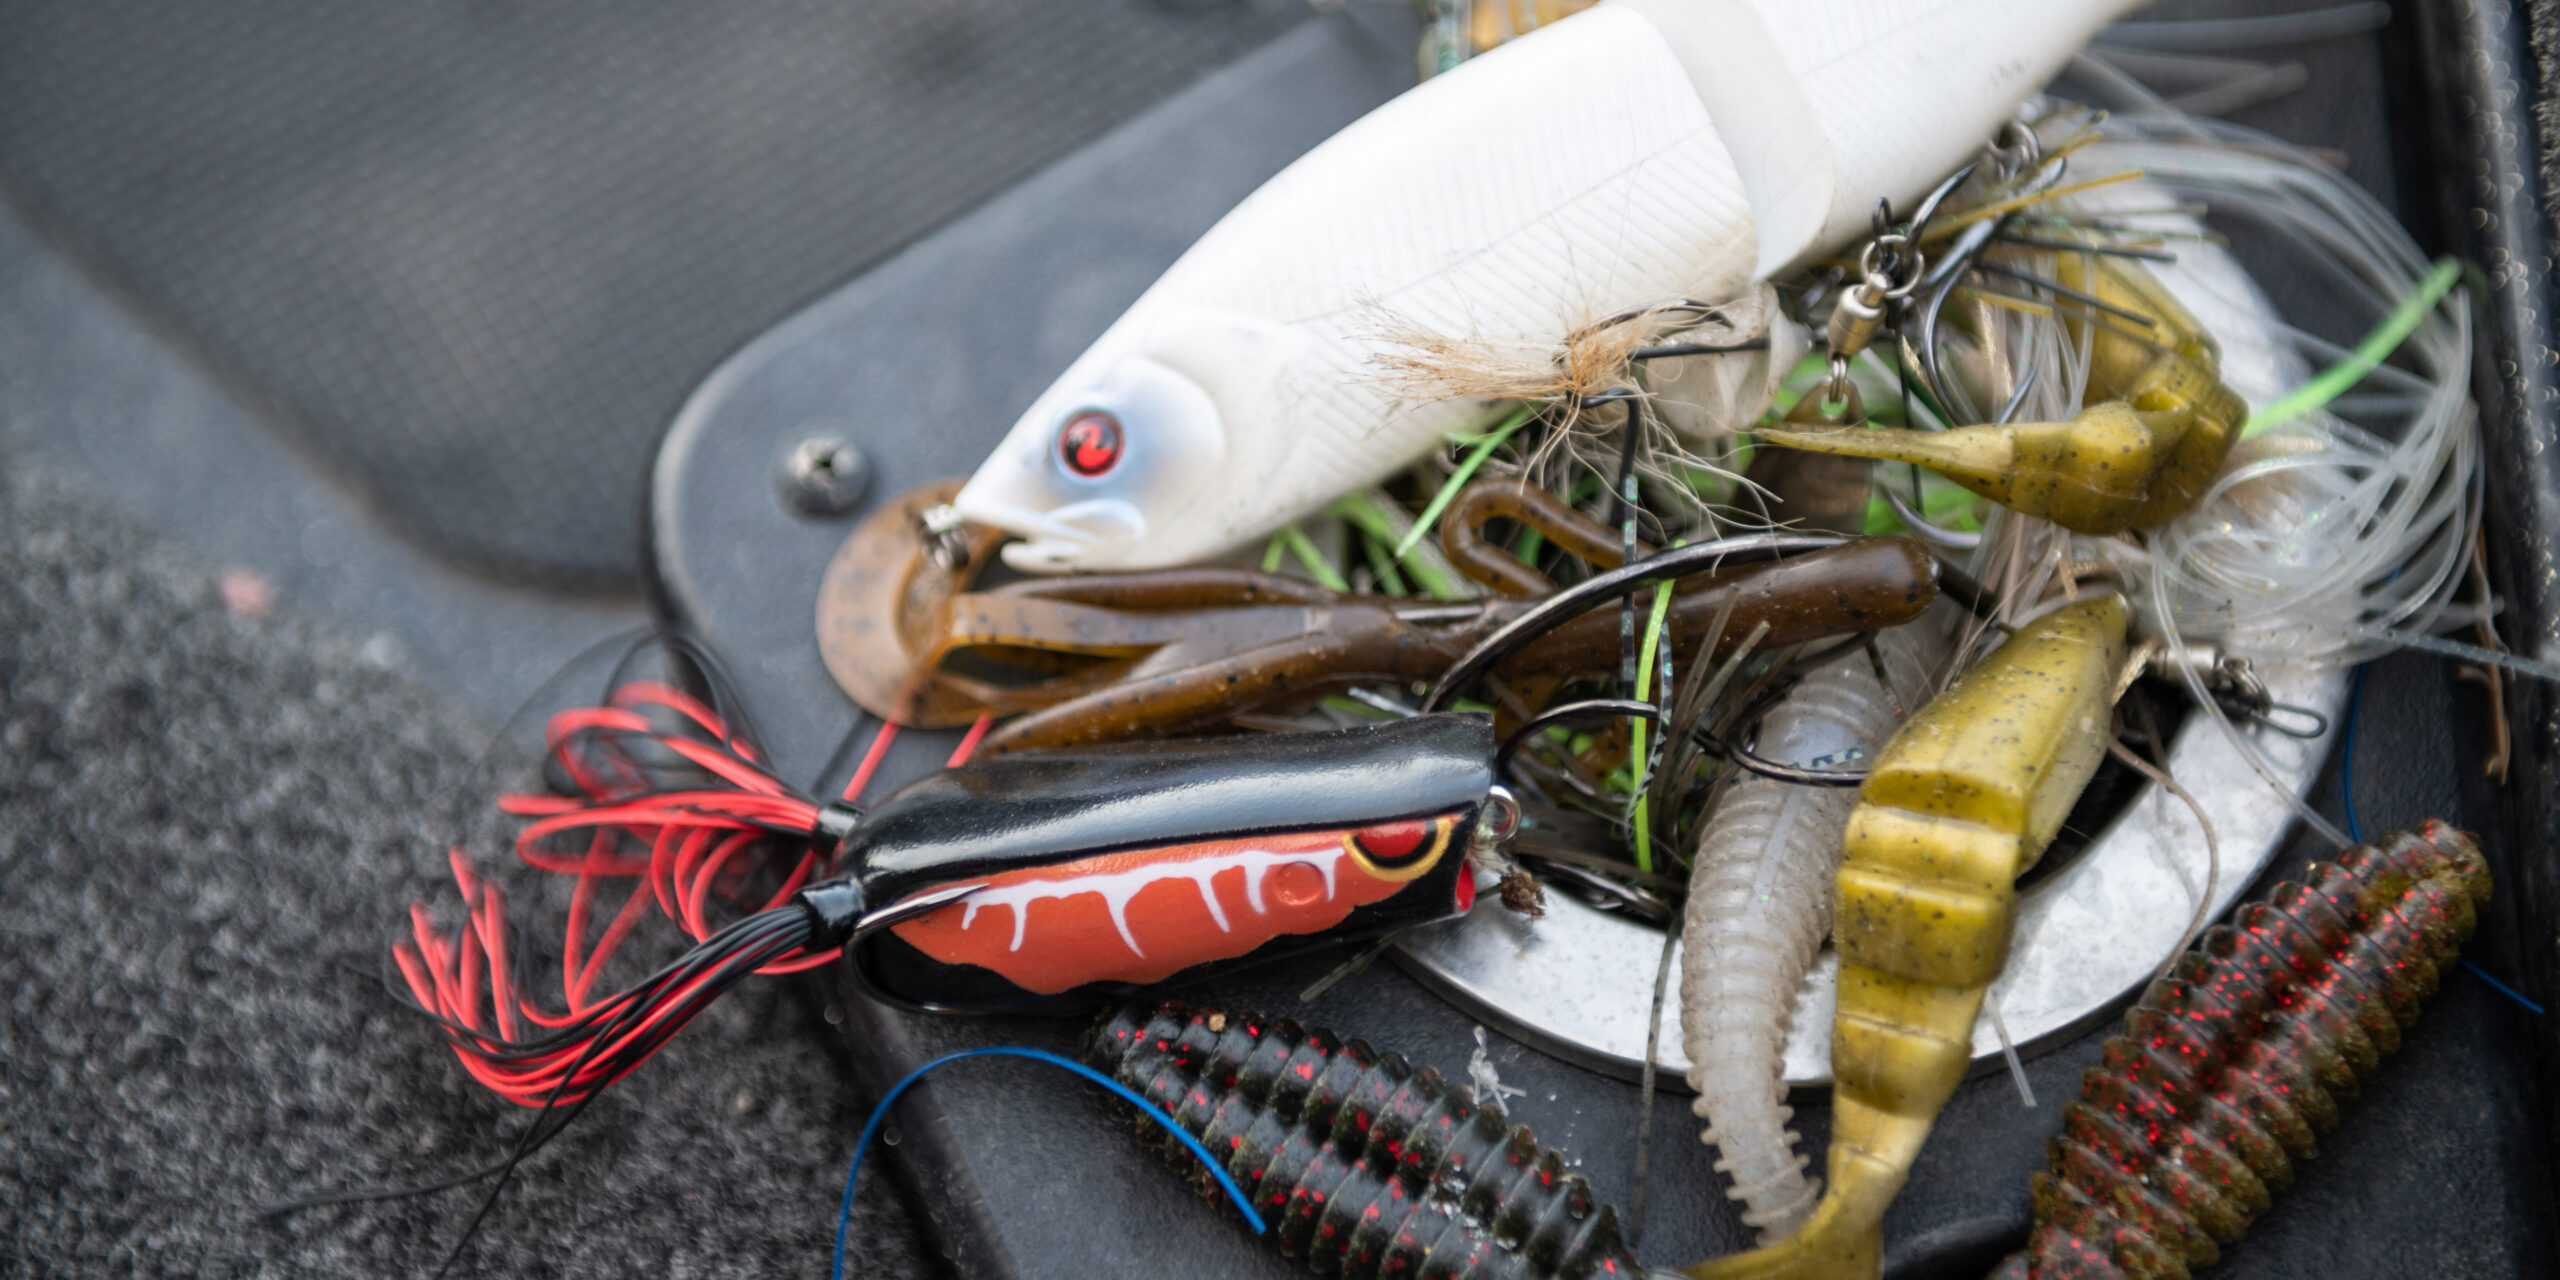 Berkley Fishing - Which 3 baits are you rigging up out of this box